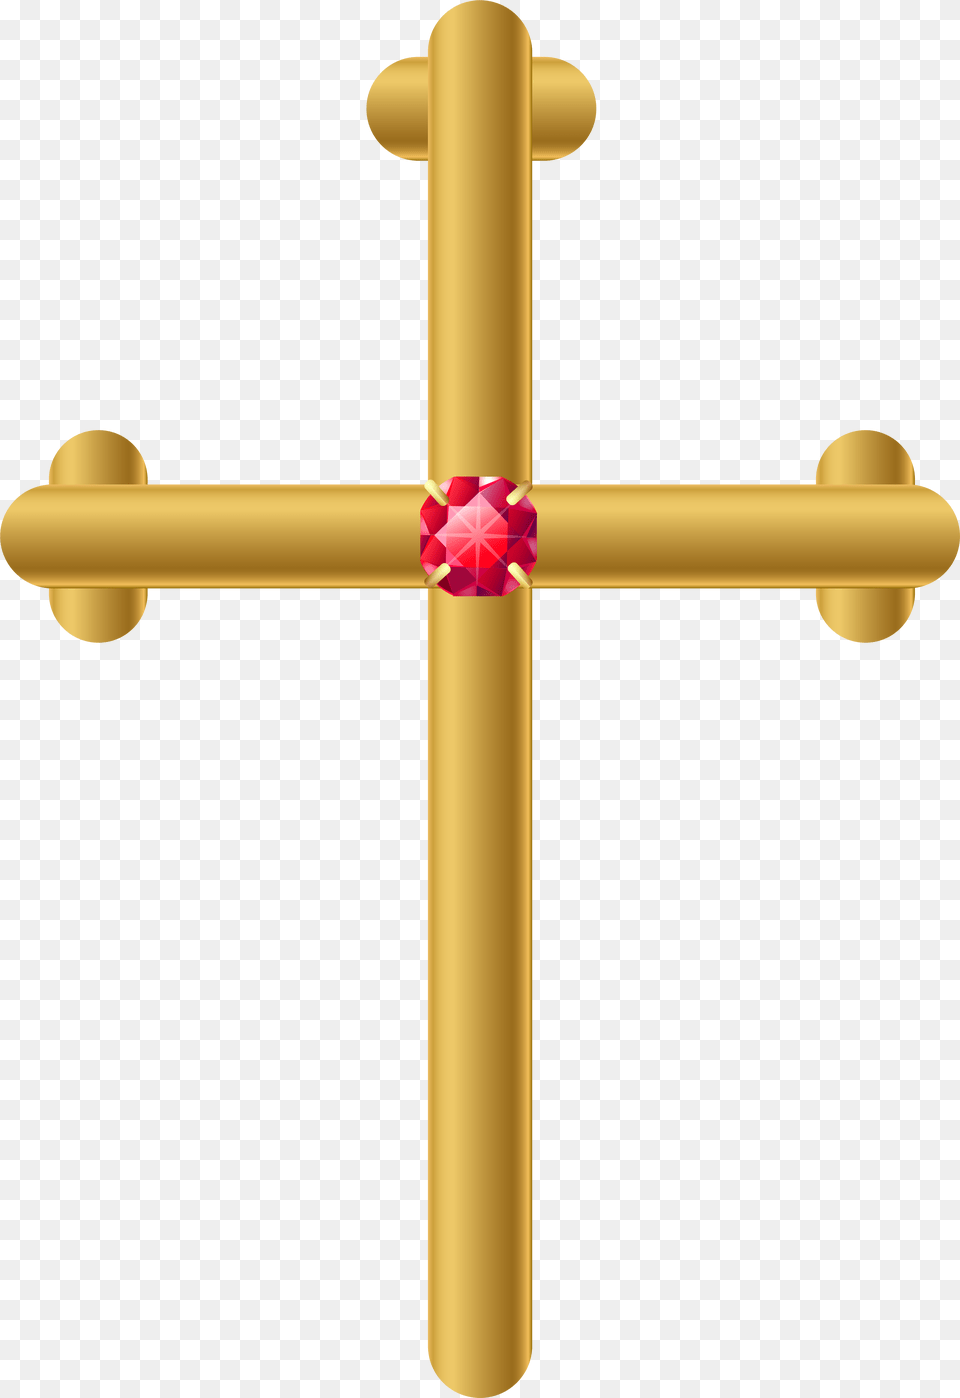 Cross Picture Royalty Files Logo Gold Cross Transparent Background, Symbol Free Png